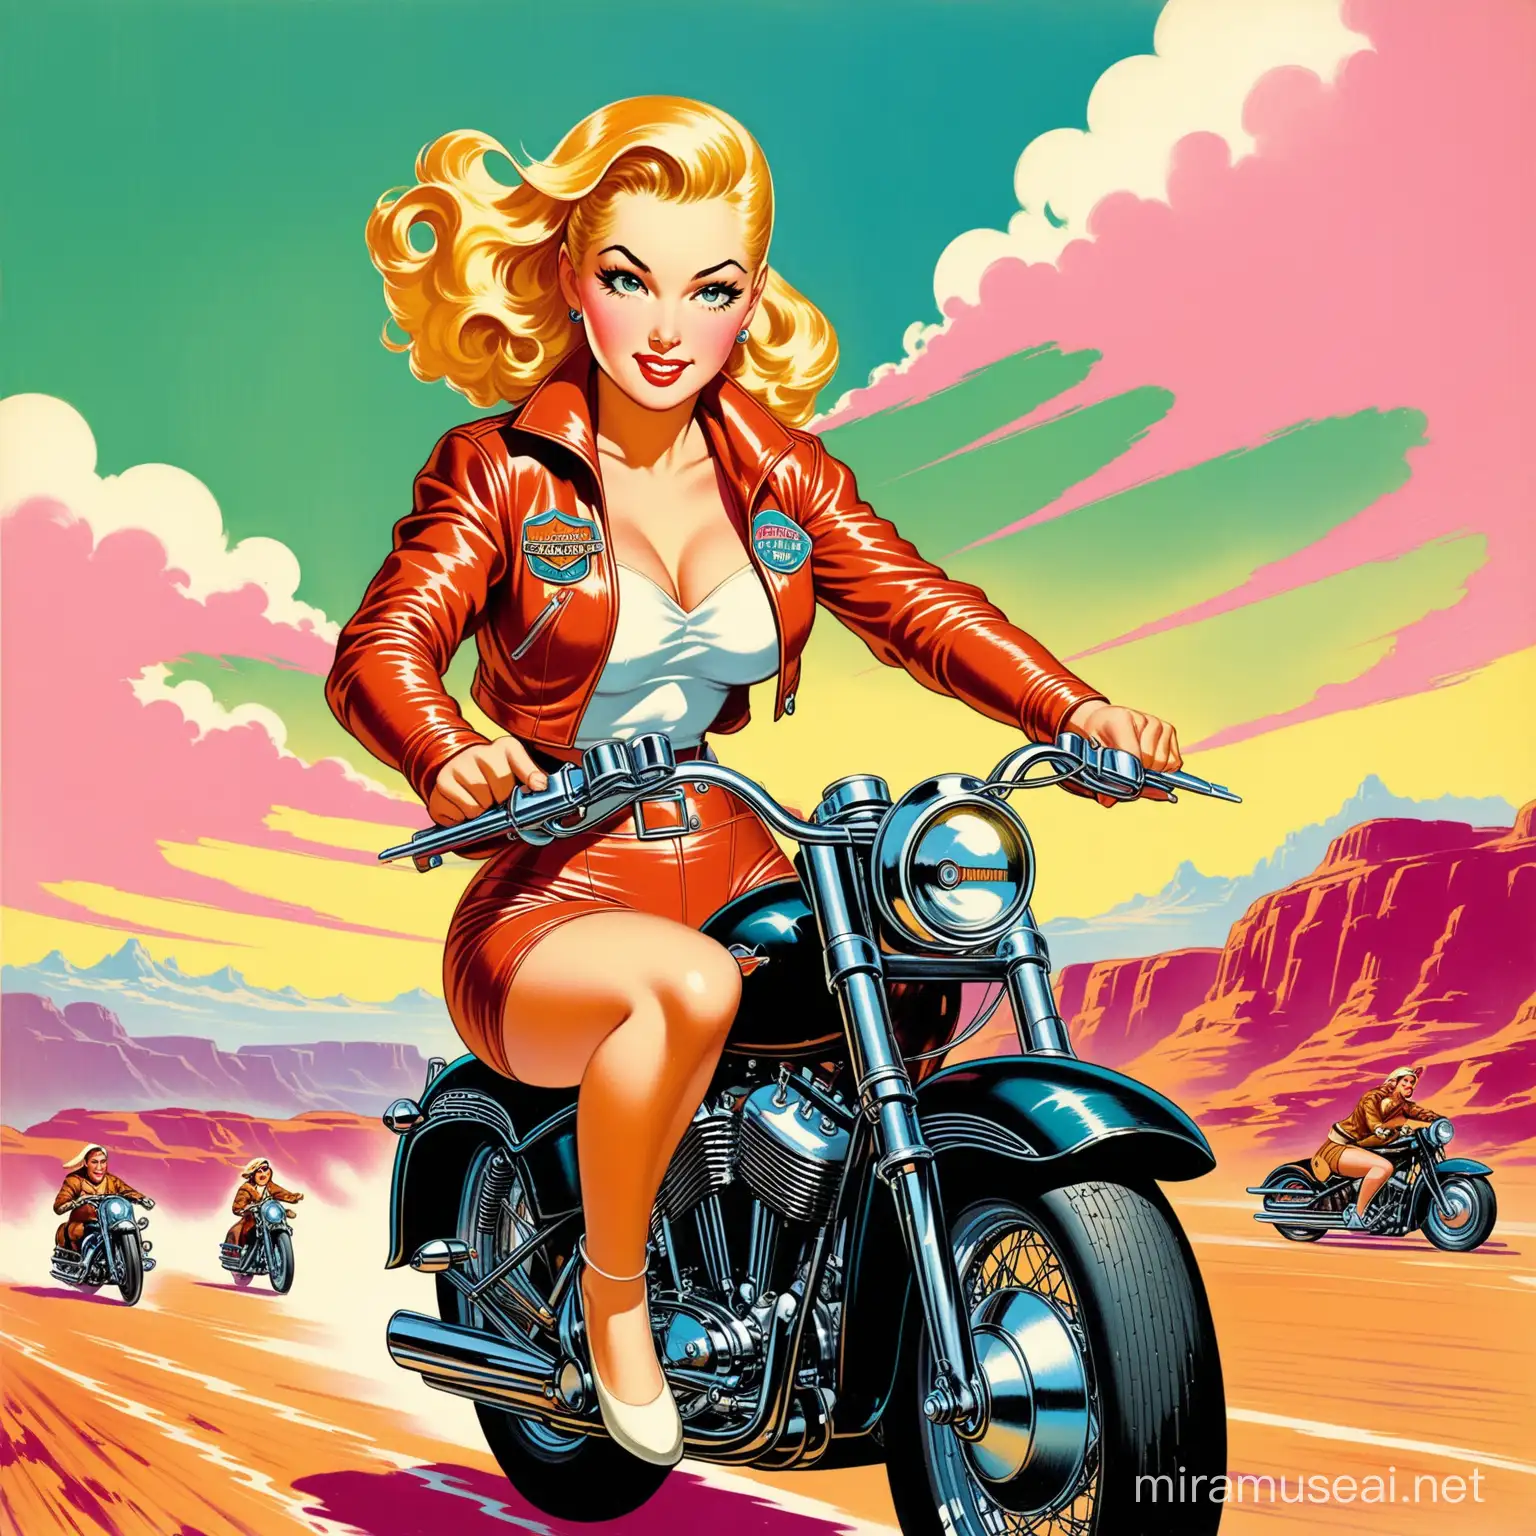 real face Madonna Ciccone wear lether jacket driving harley davison motorcycle dramatic style of 1950s & 1960s vintage also modern  sci-fi illustrations, Paint them in the stereoscopic， future style, colorful style of Gil Elvgren and other colorful pin up sci-fi artists of the 1950s,